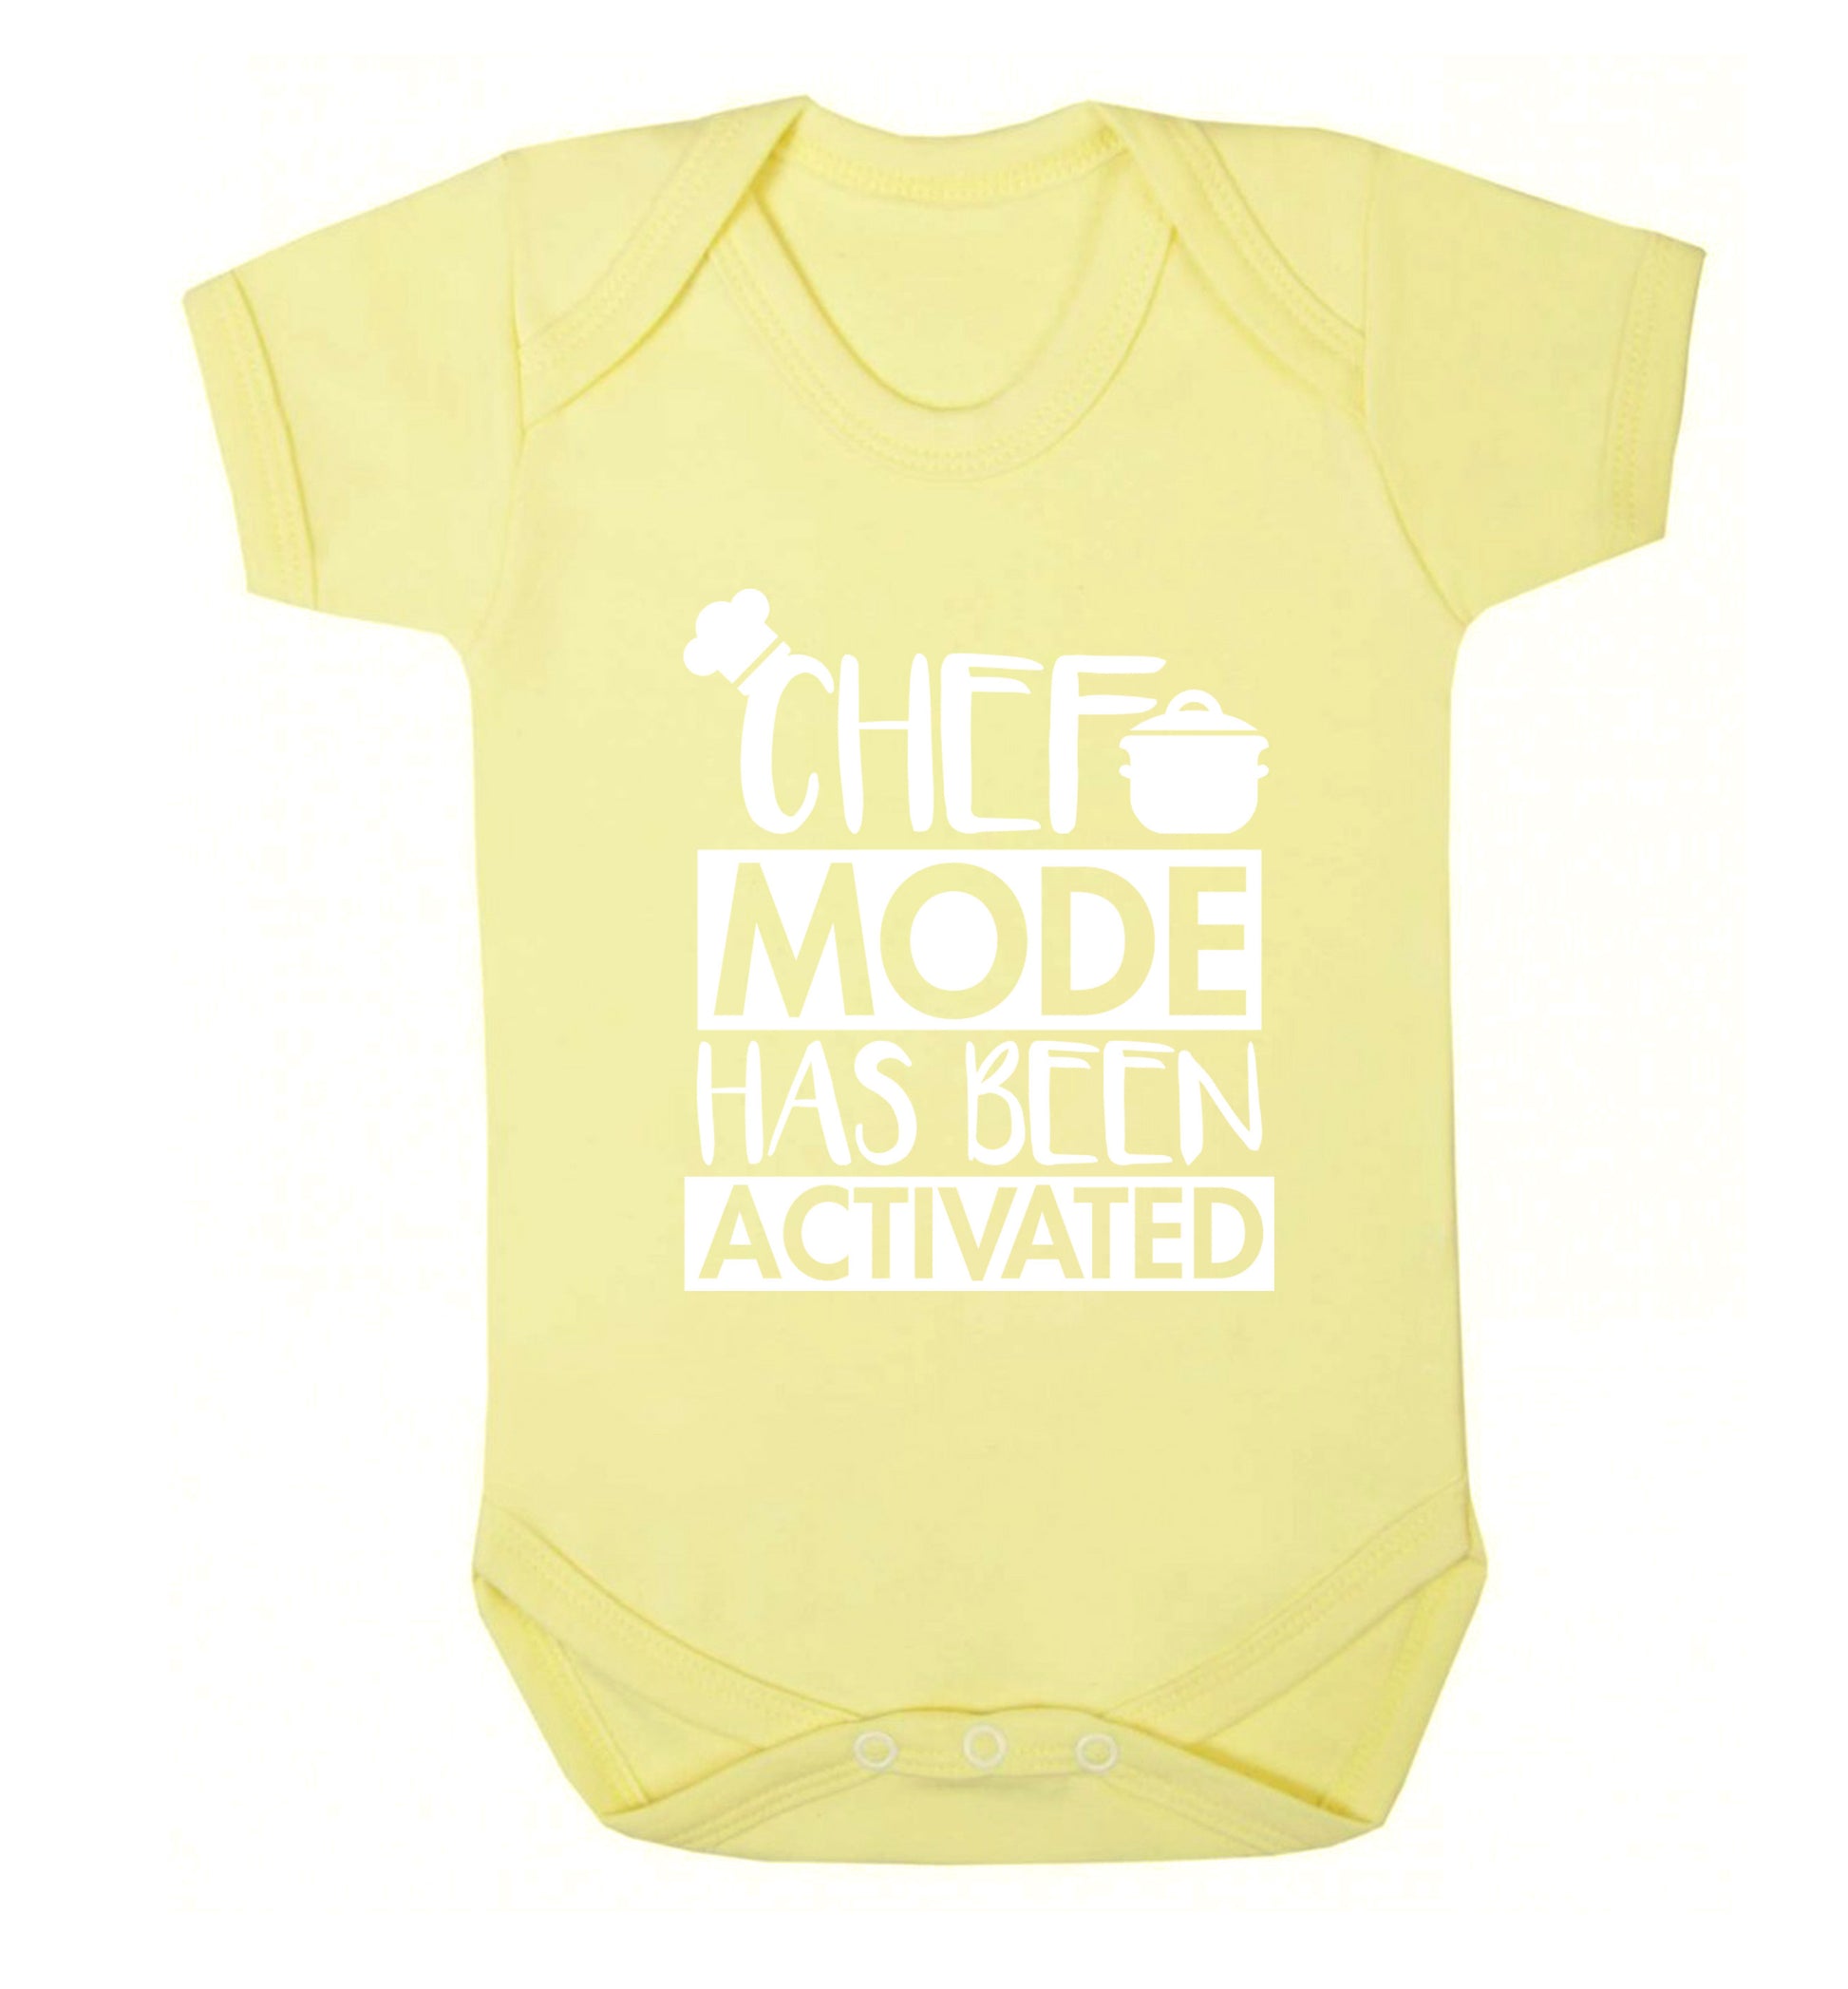 Chef mode has been activated Baby Vest pale yellow 18-24 months